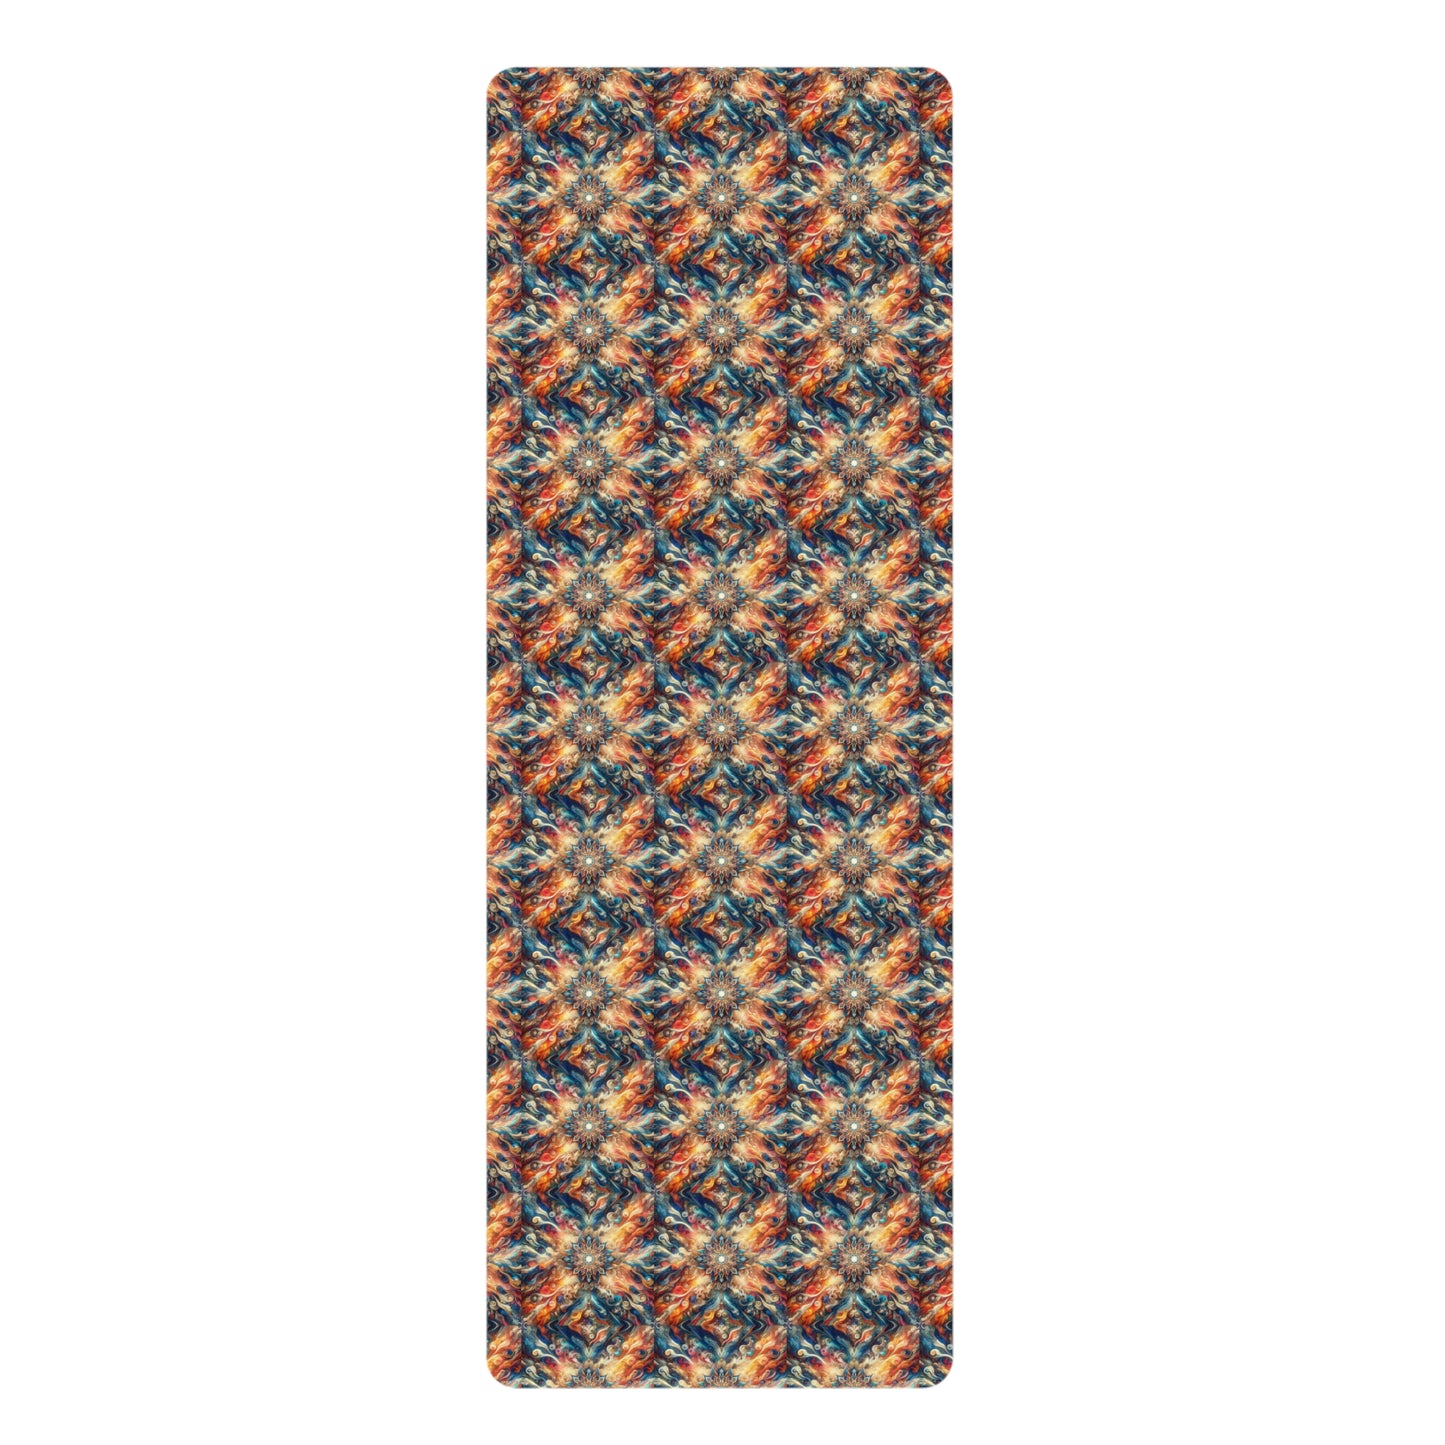 Cultural Mosaic Yoga Mat: Deluxe Microfiber with Vibrant World Design